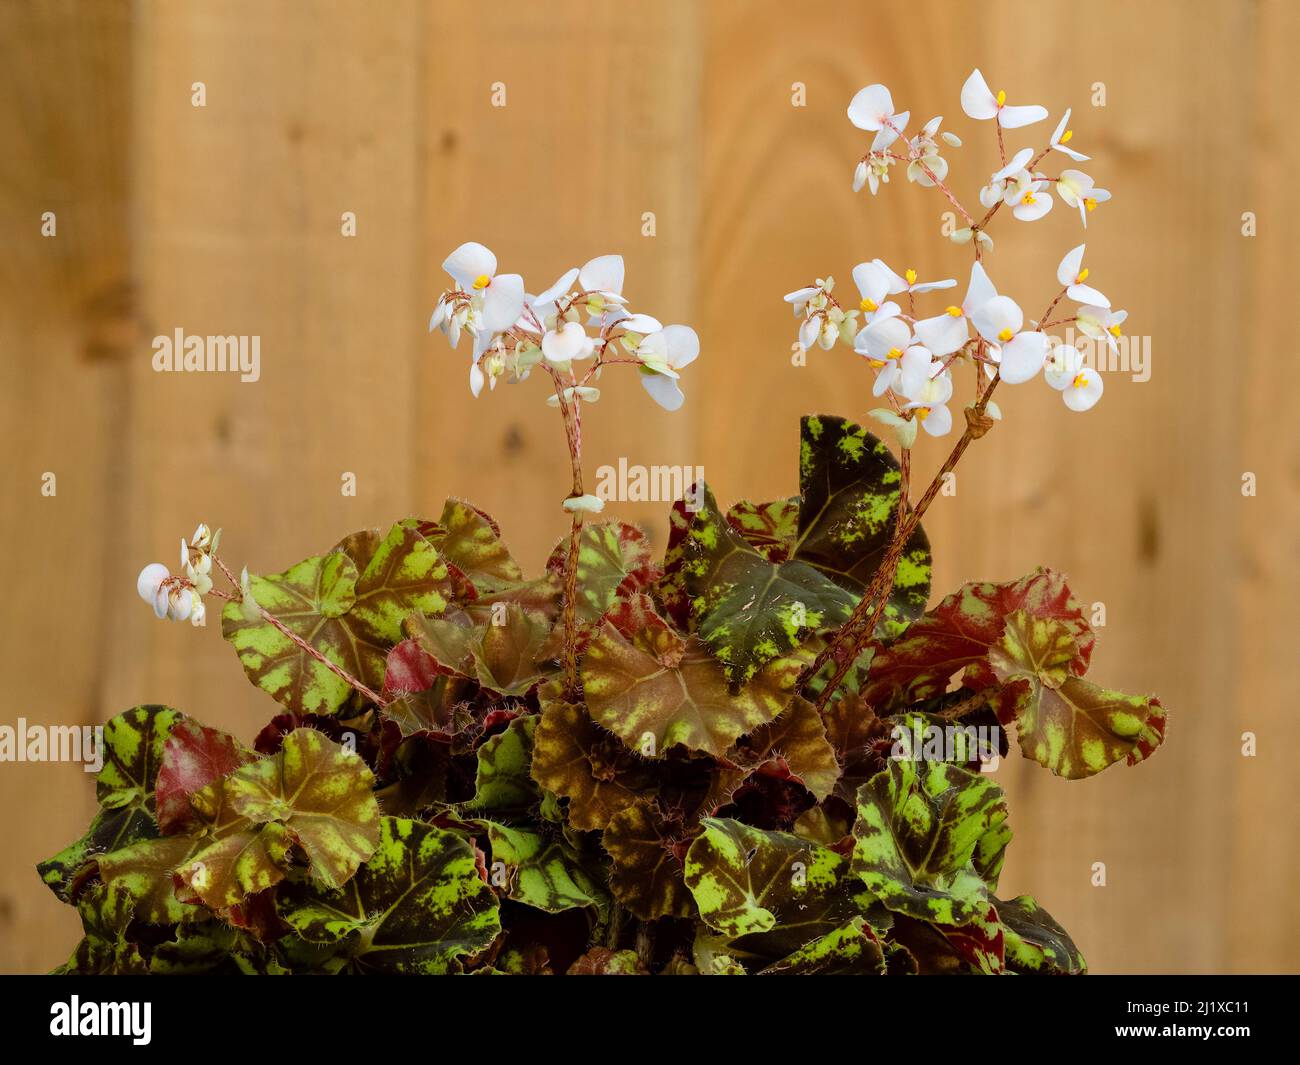 White spring flowers stand over the brown and yellow green foliage of the tender house plant, Begonia 'Zumba' Stock Photo